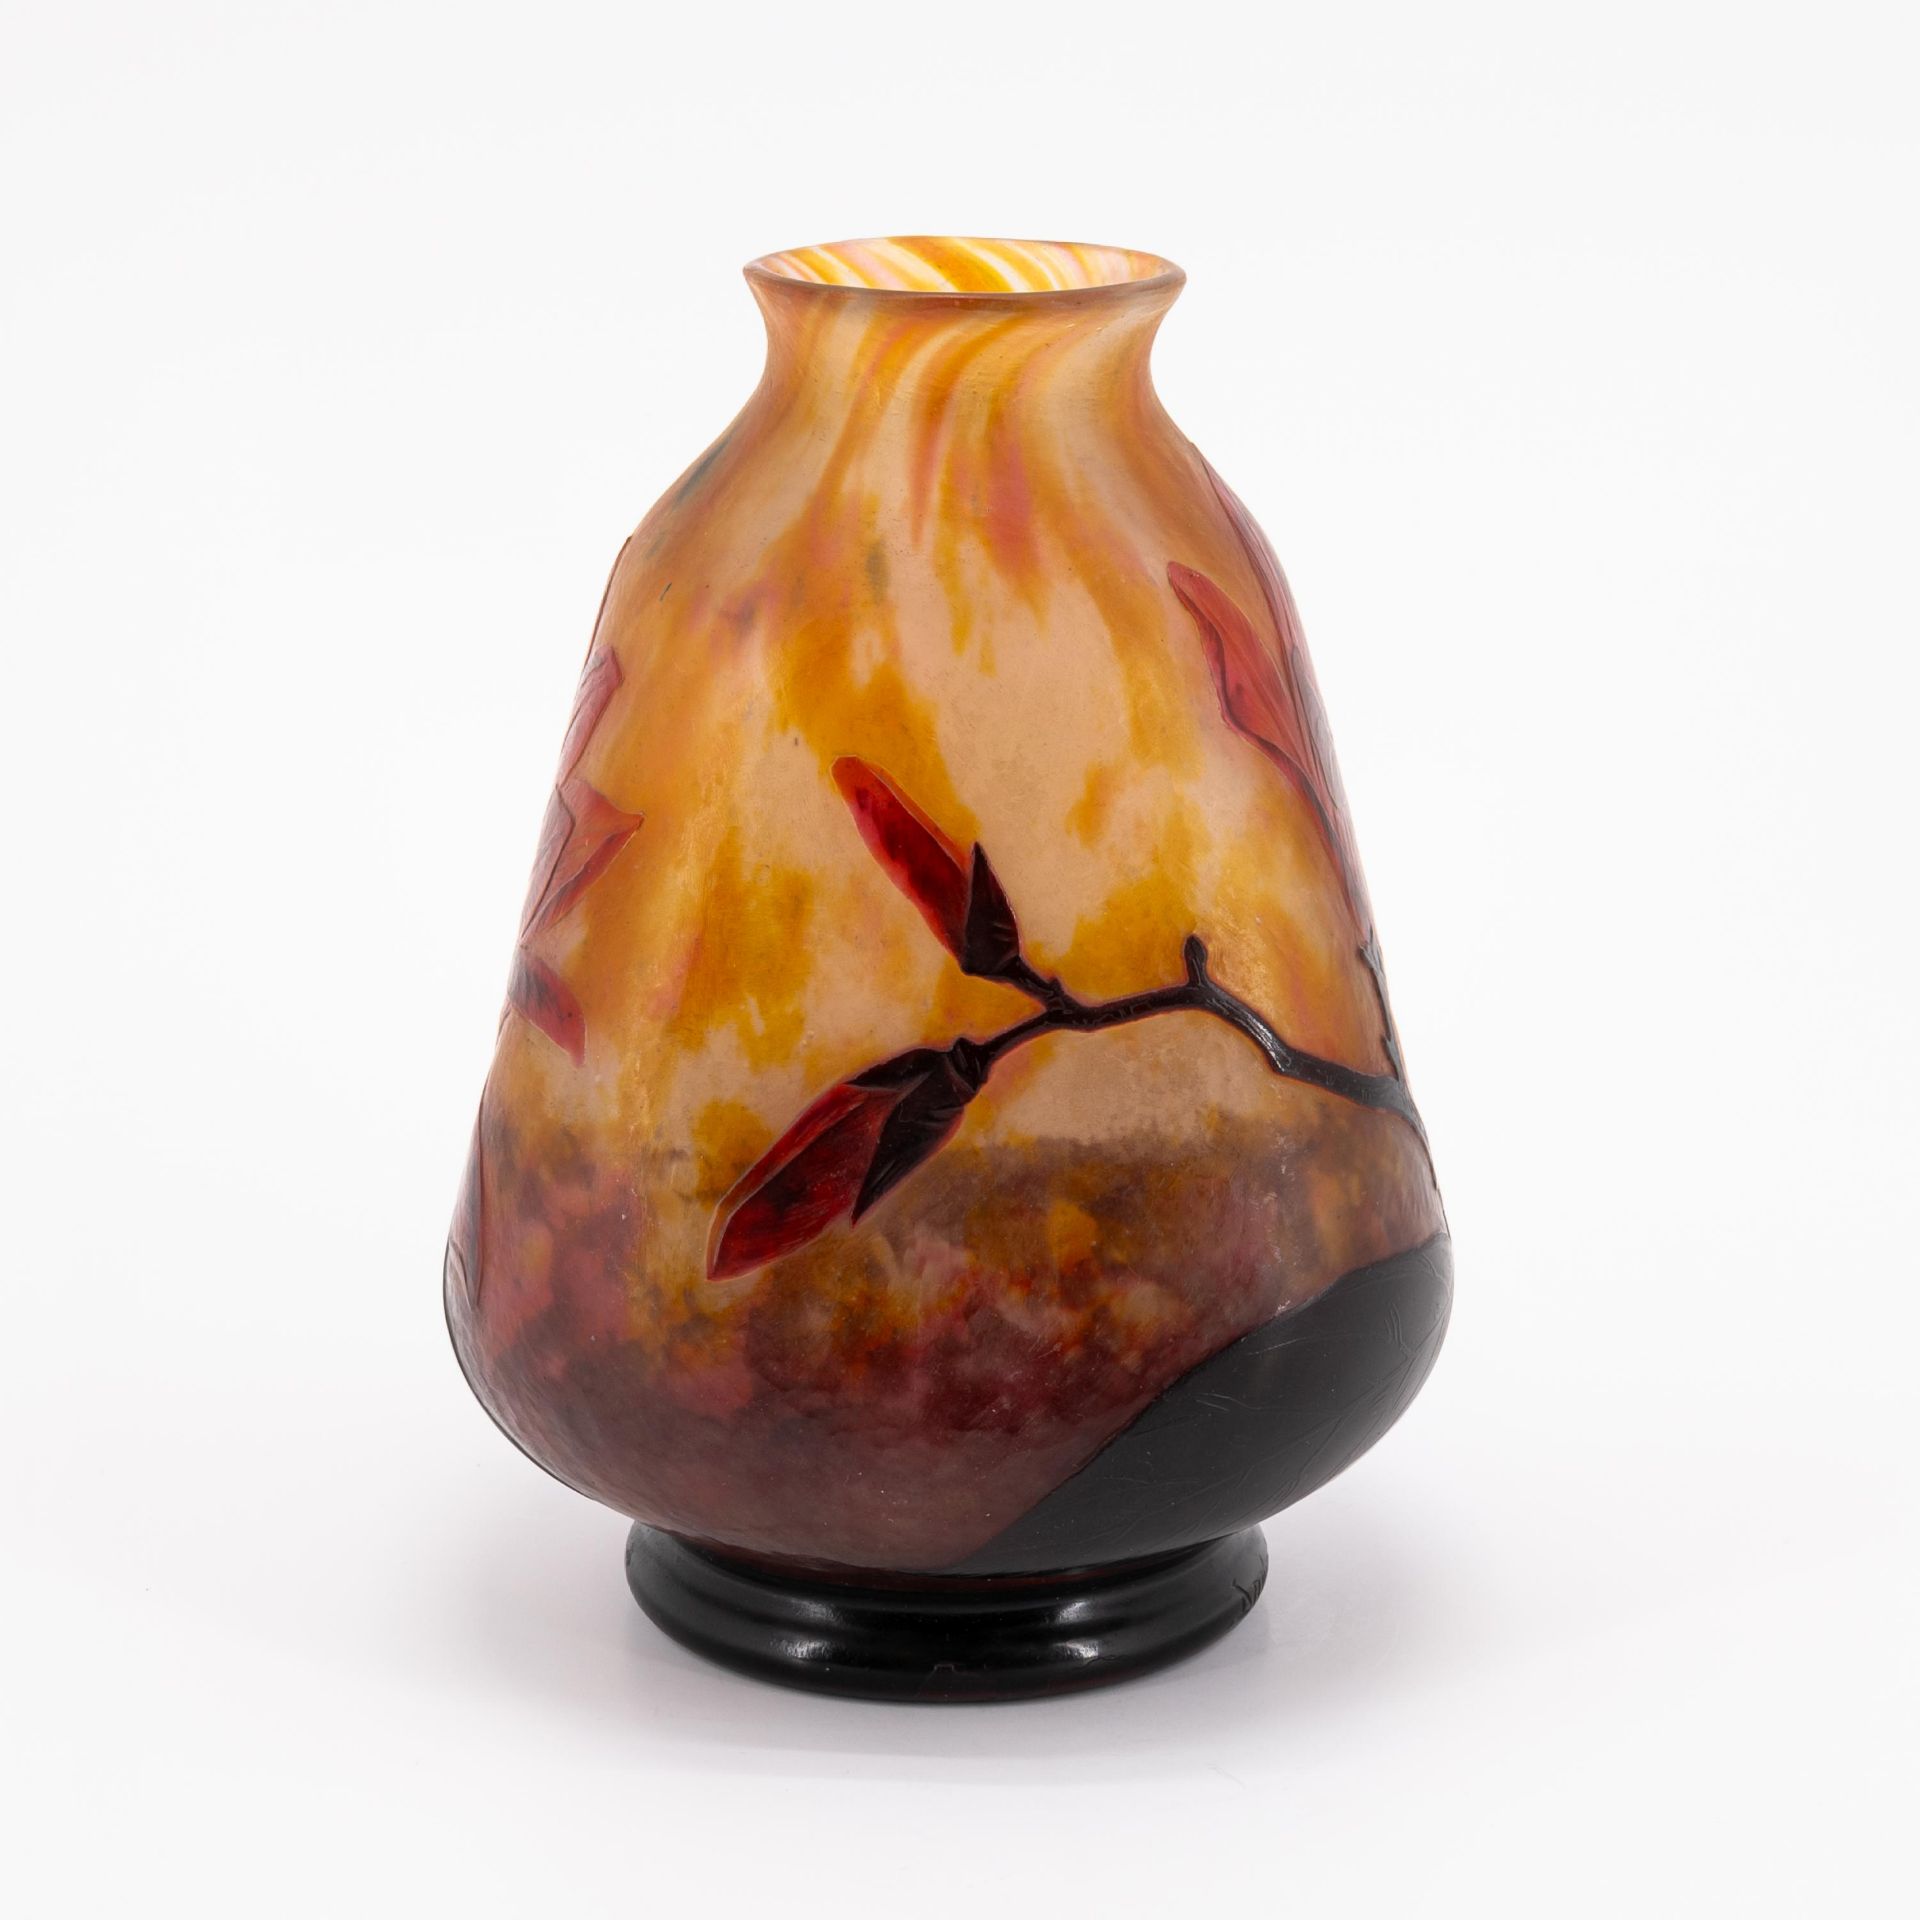 GLASS VASE WITH MAGNOLIA BRANCHES - Image 4 of 7